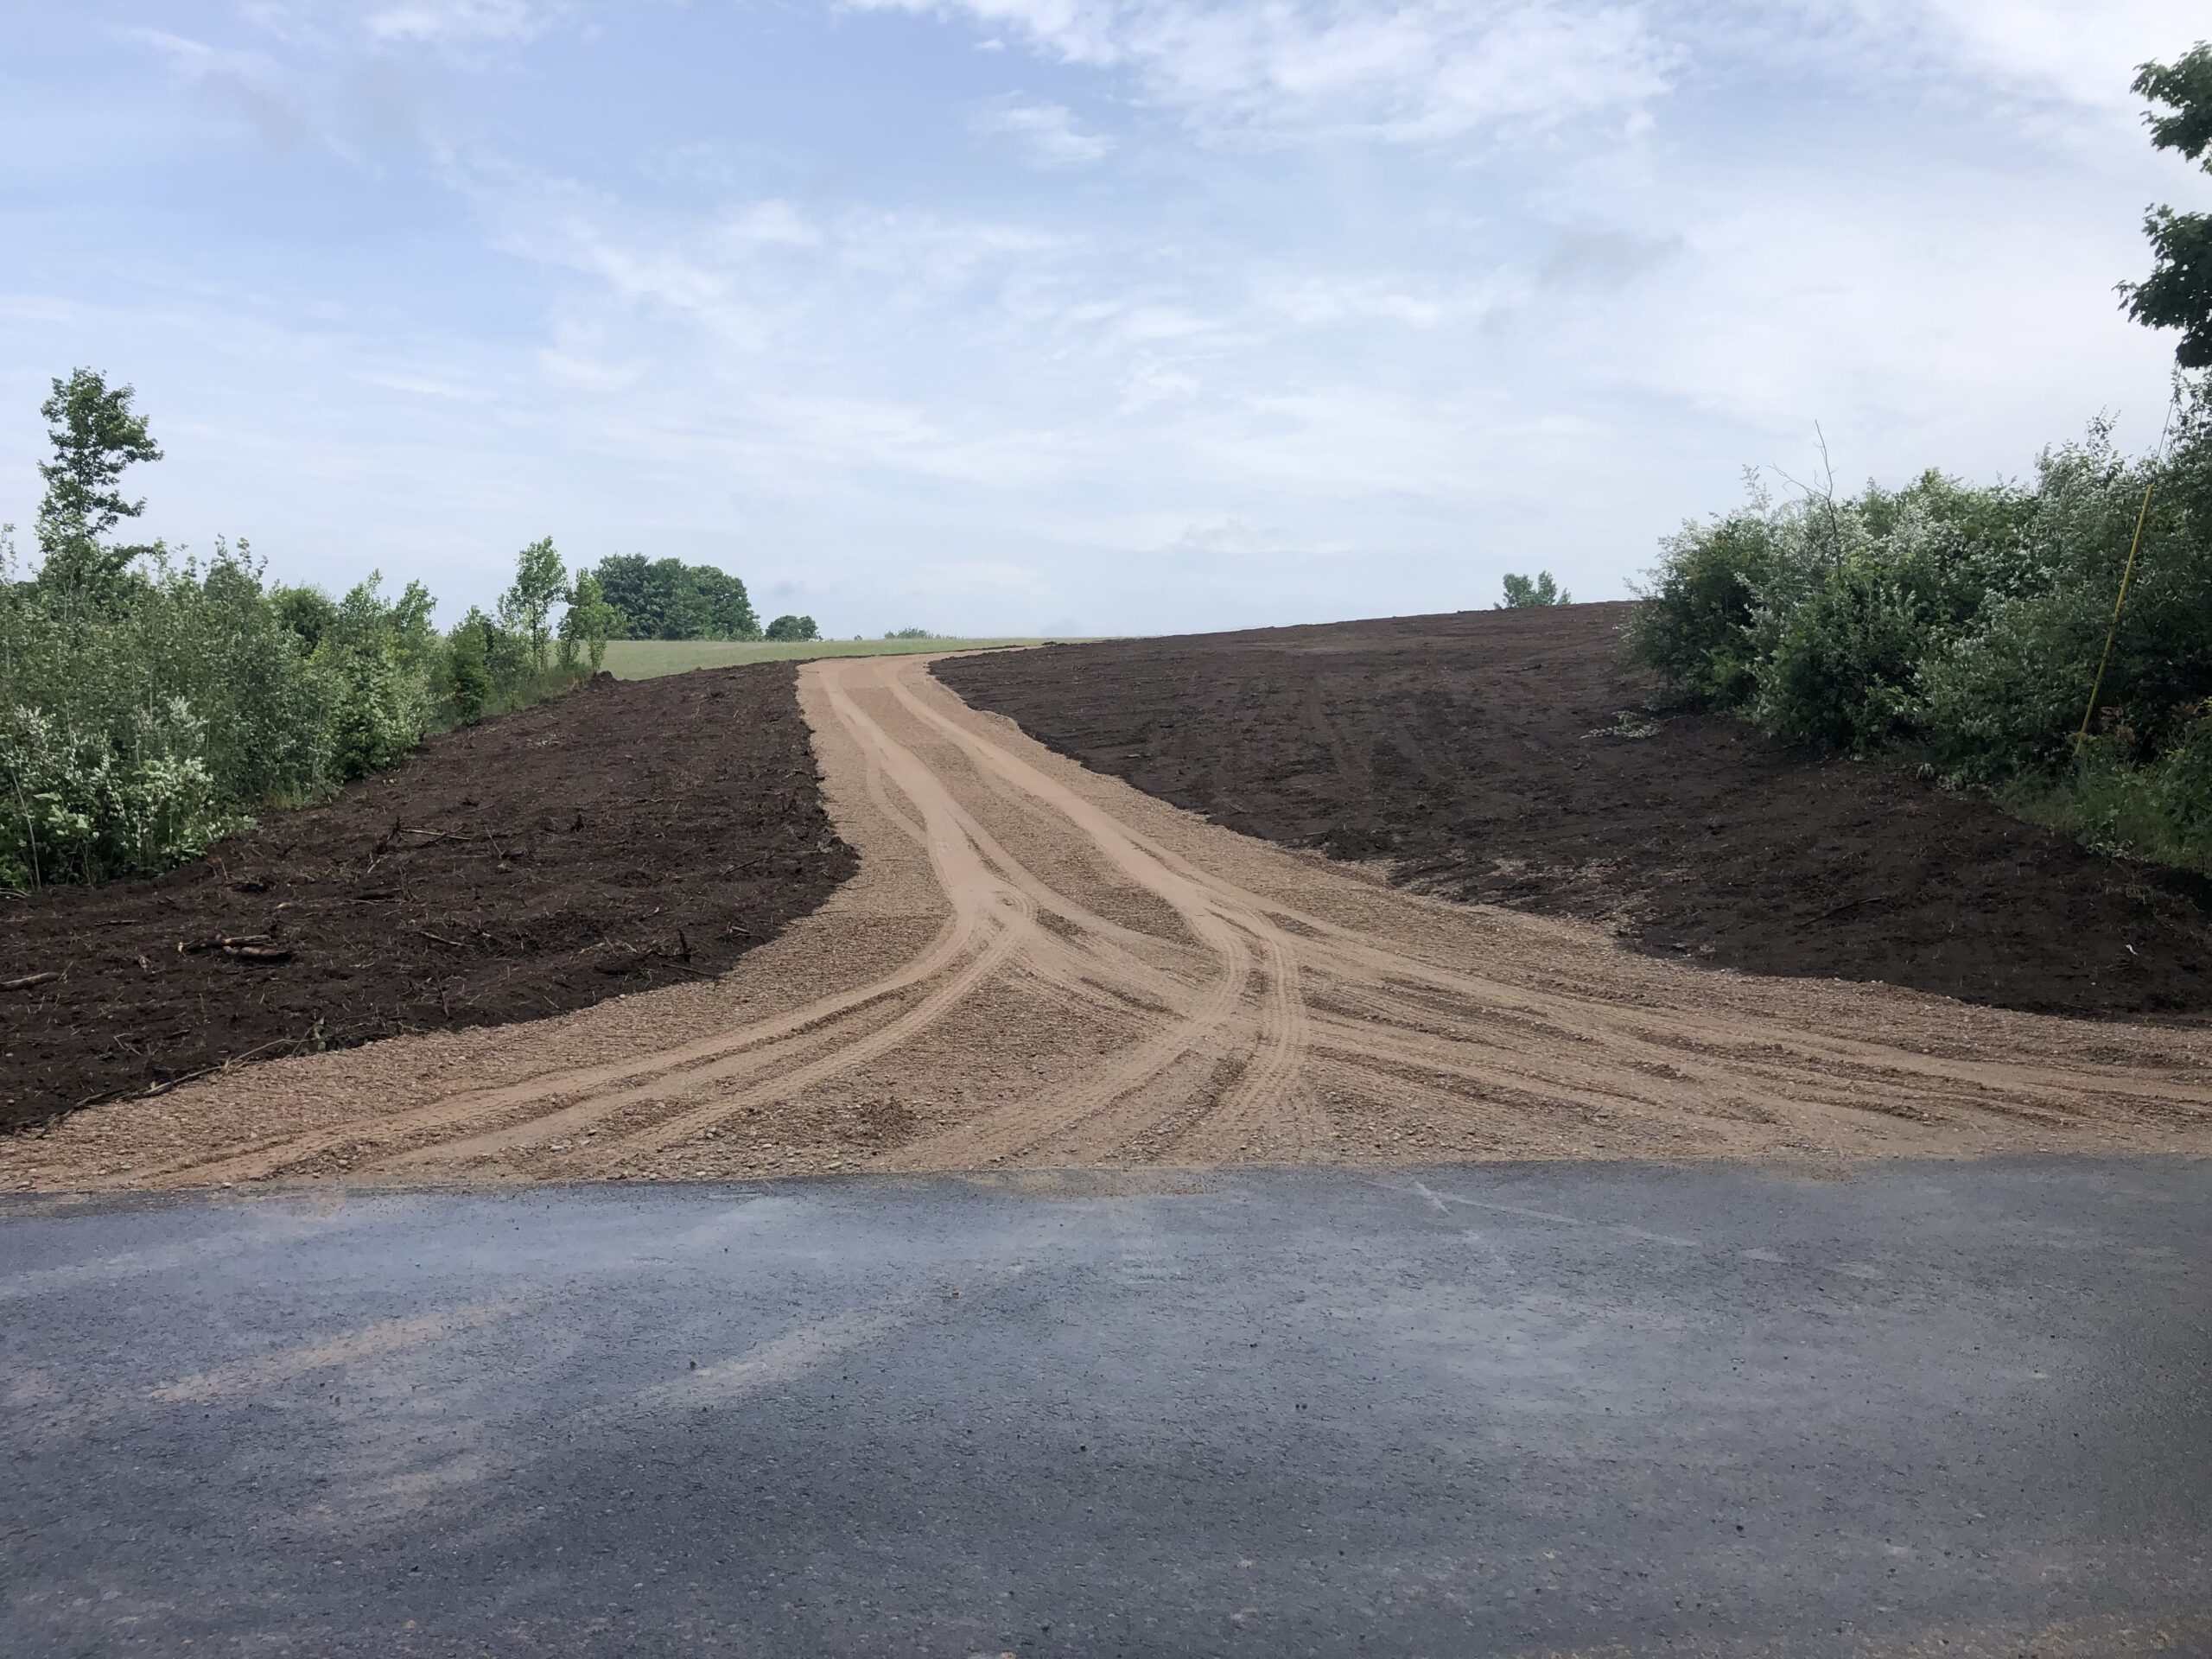 Benzie County Excavation Companies for Driveway Installation and Grading